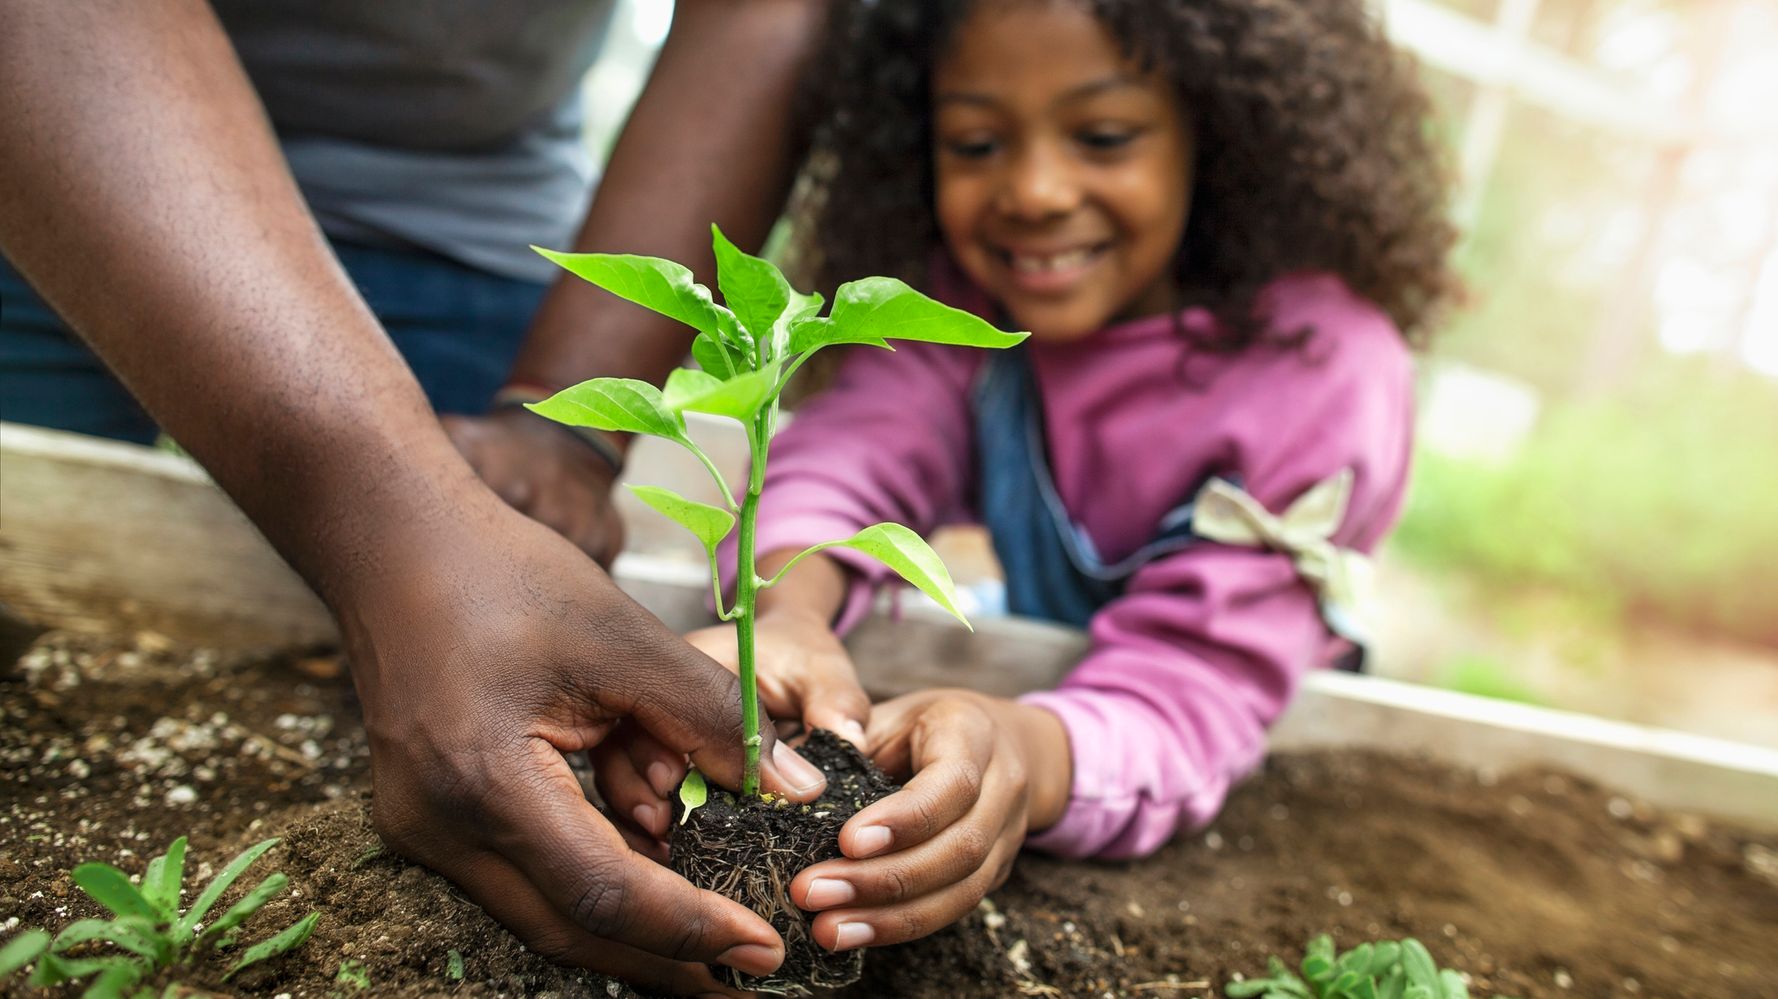 A young girl plants a sprout in a garden with the help of an adult